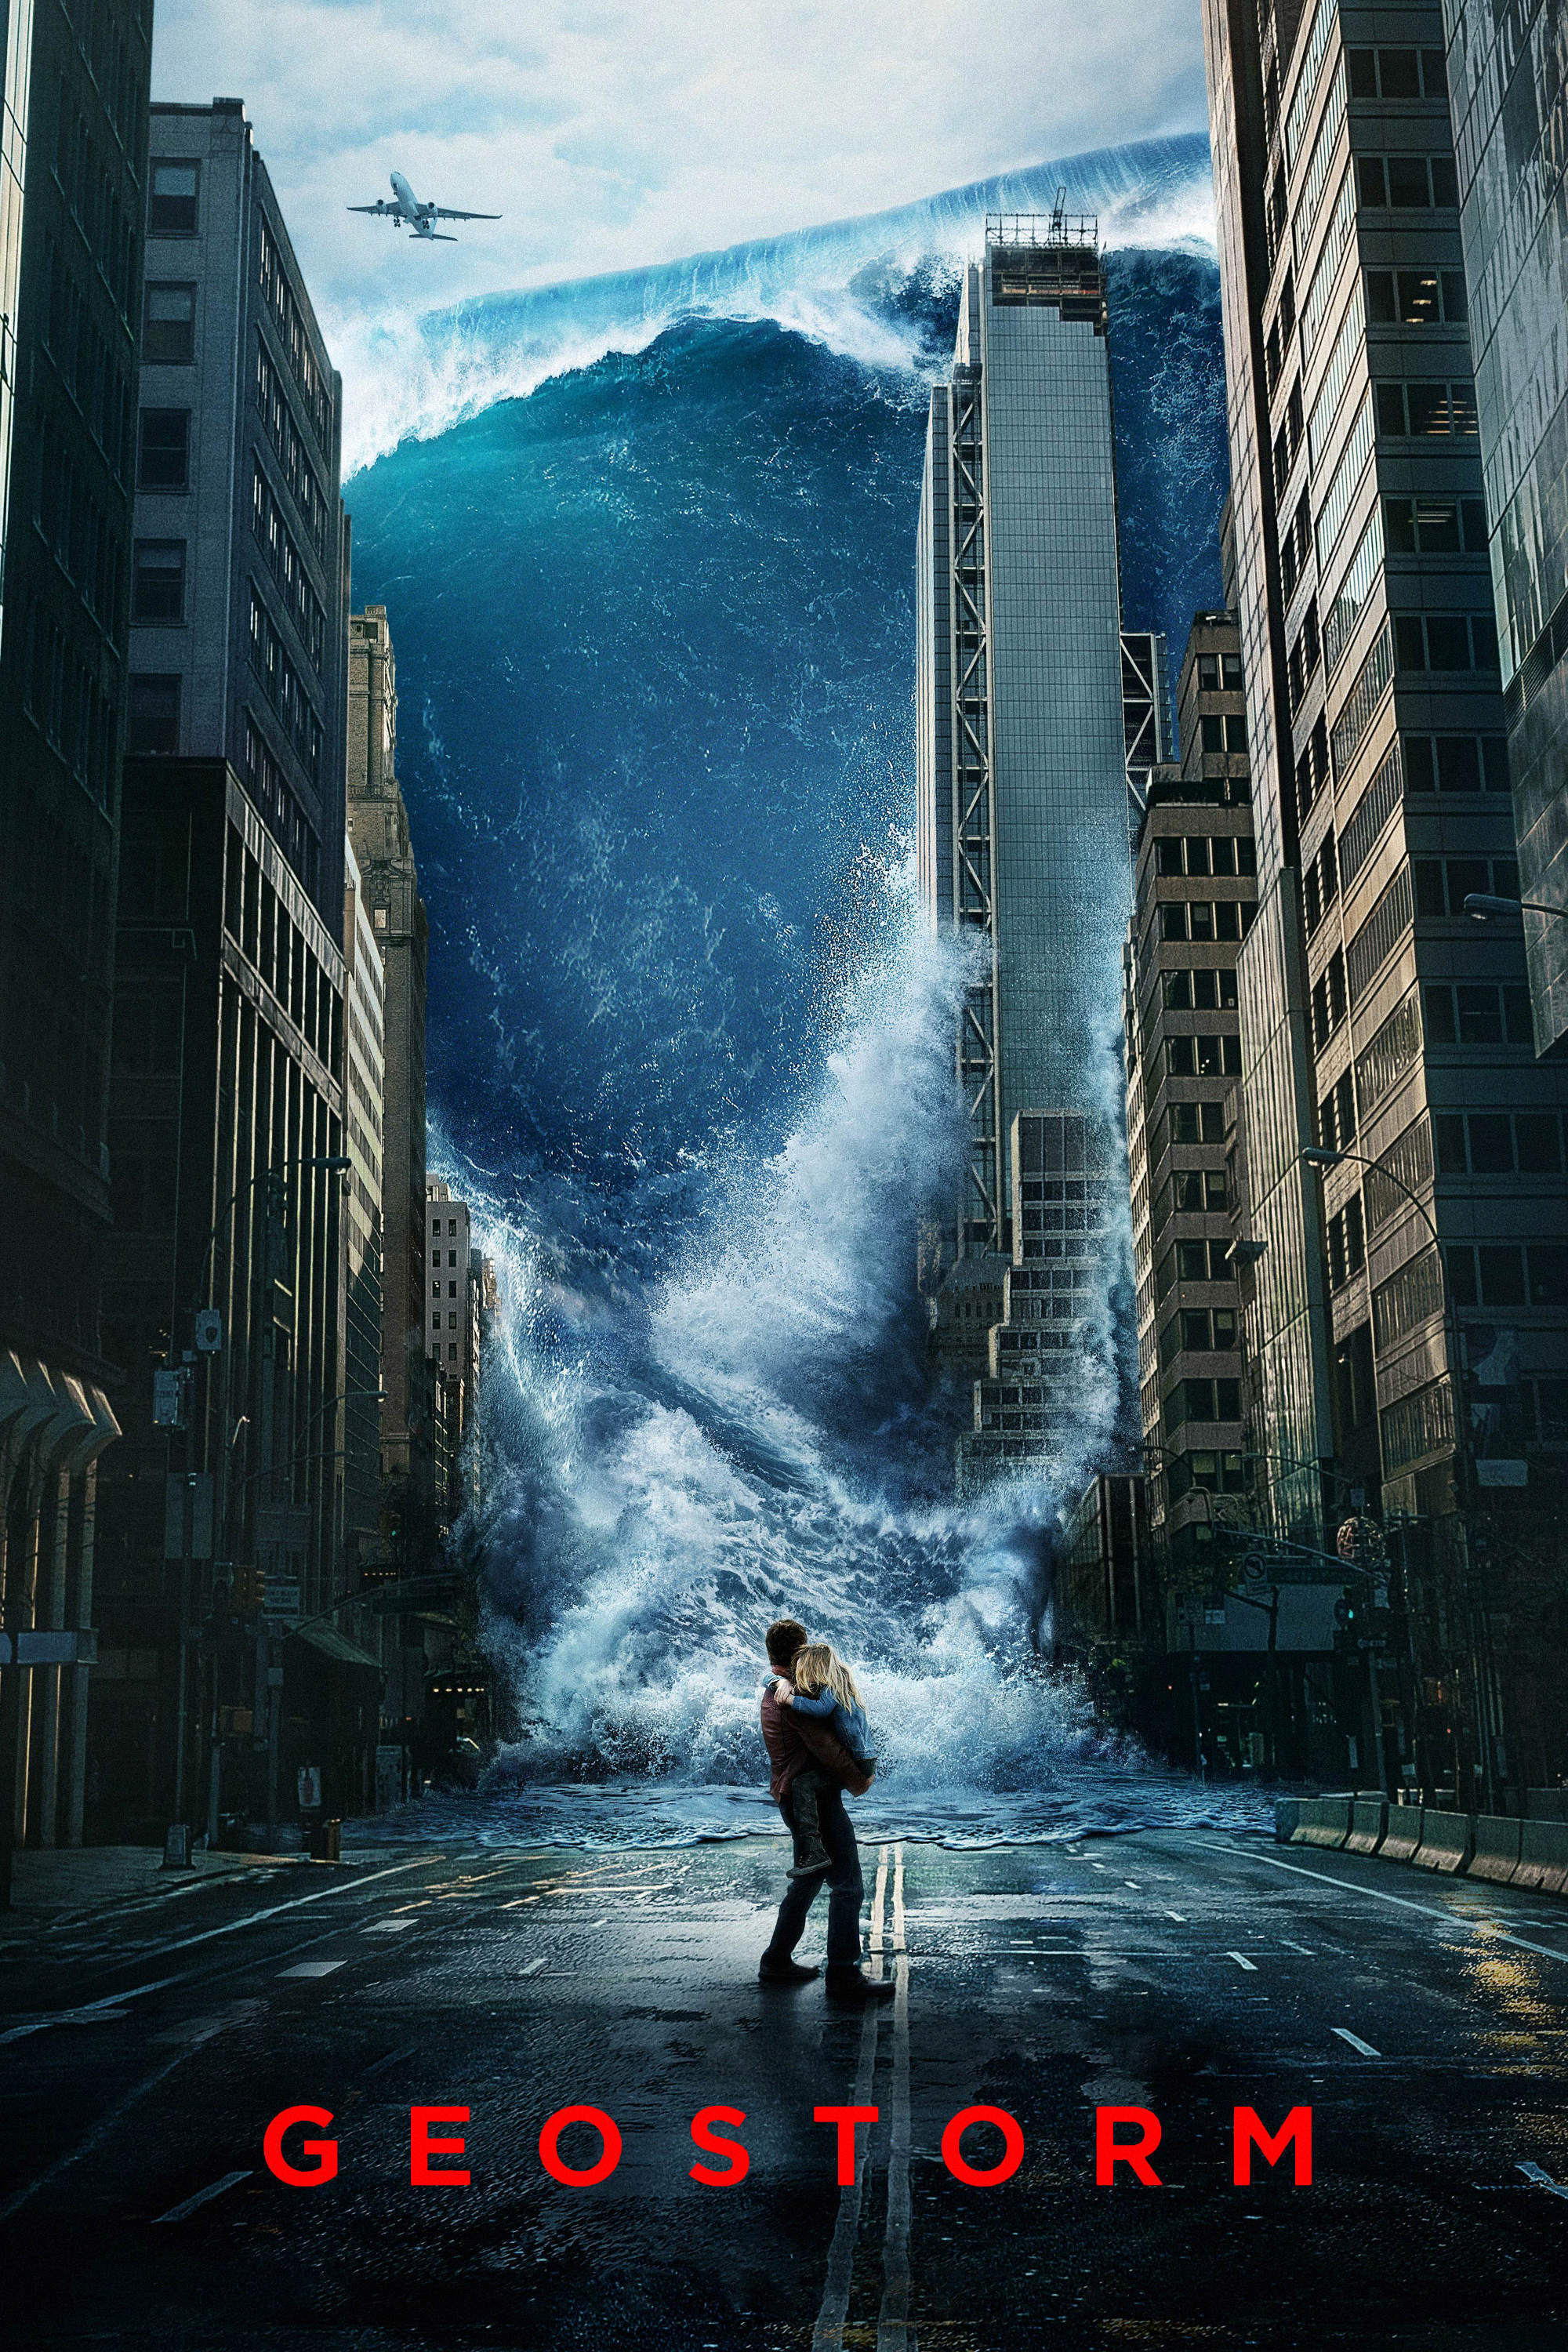 Poster for the movie "Geostorm"